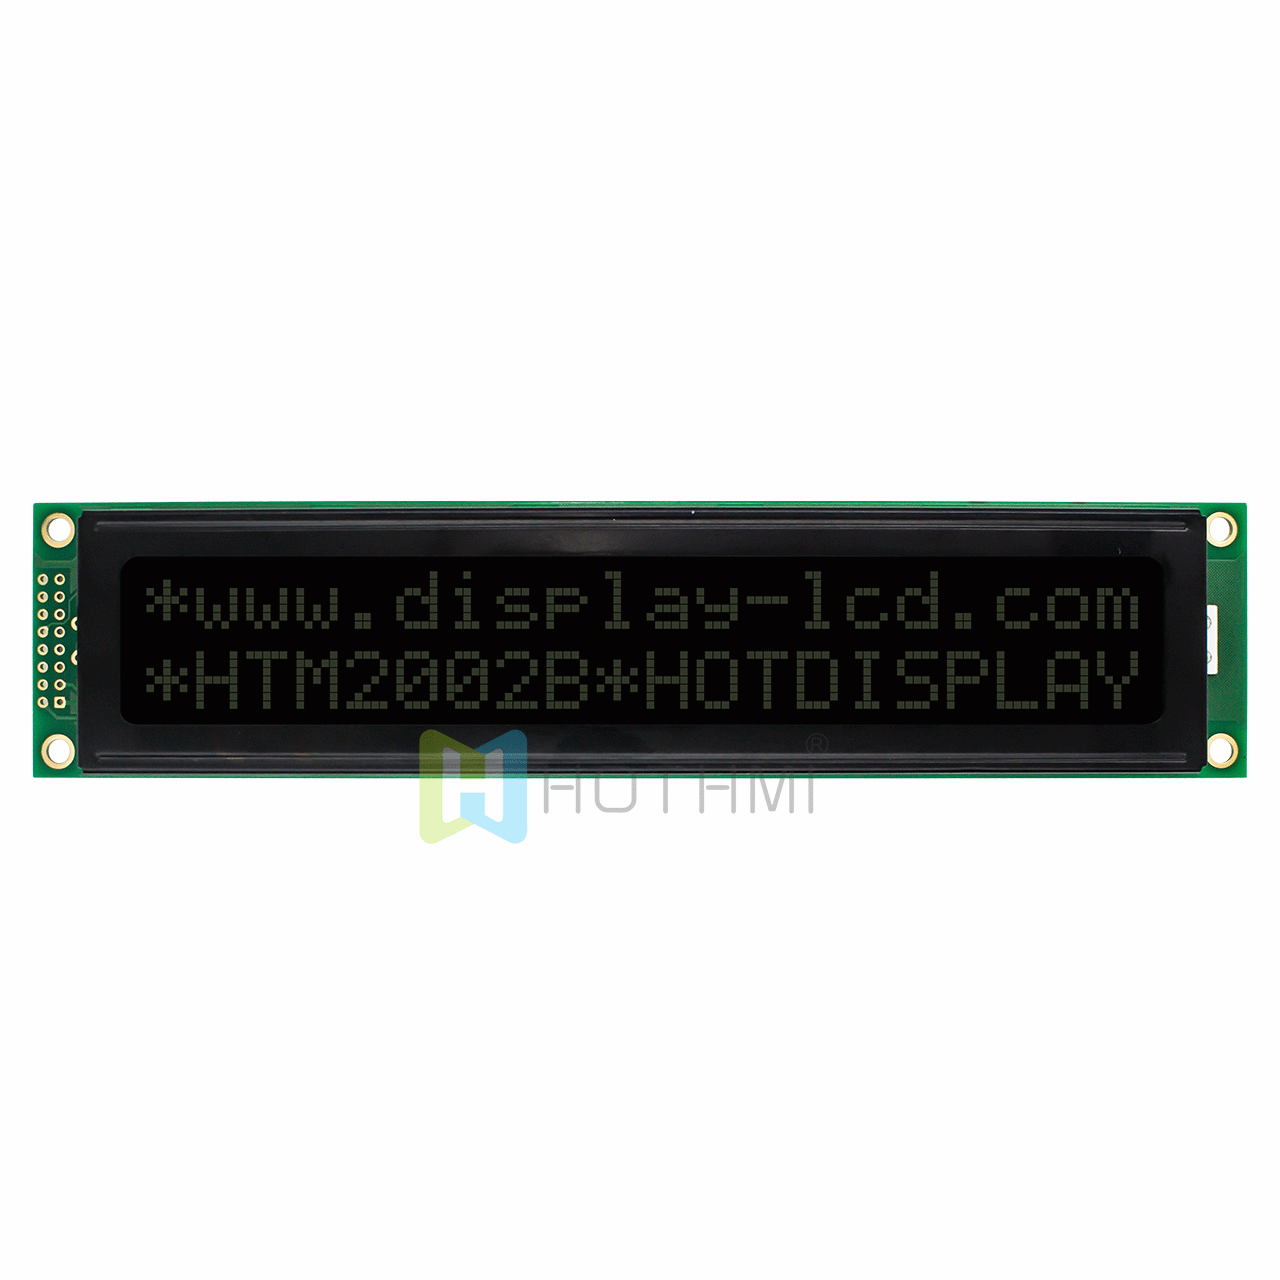 20X2 character monochrome LCD screen module/DSTN (-) negative display/white backlight/white characters on black background/5.0V/ST7066U control/Adruino/wide temperature display/wide viewing angle display